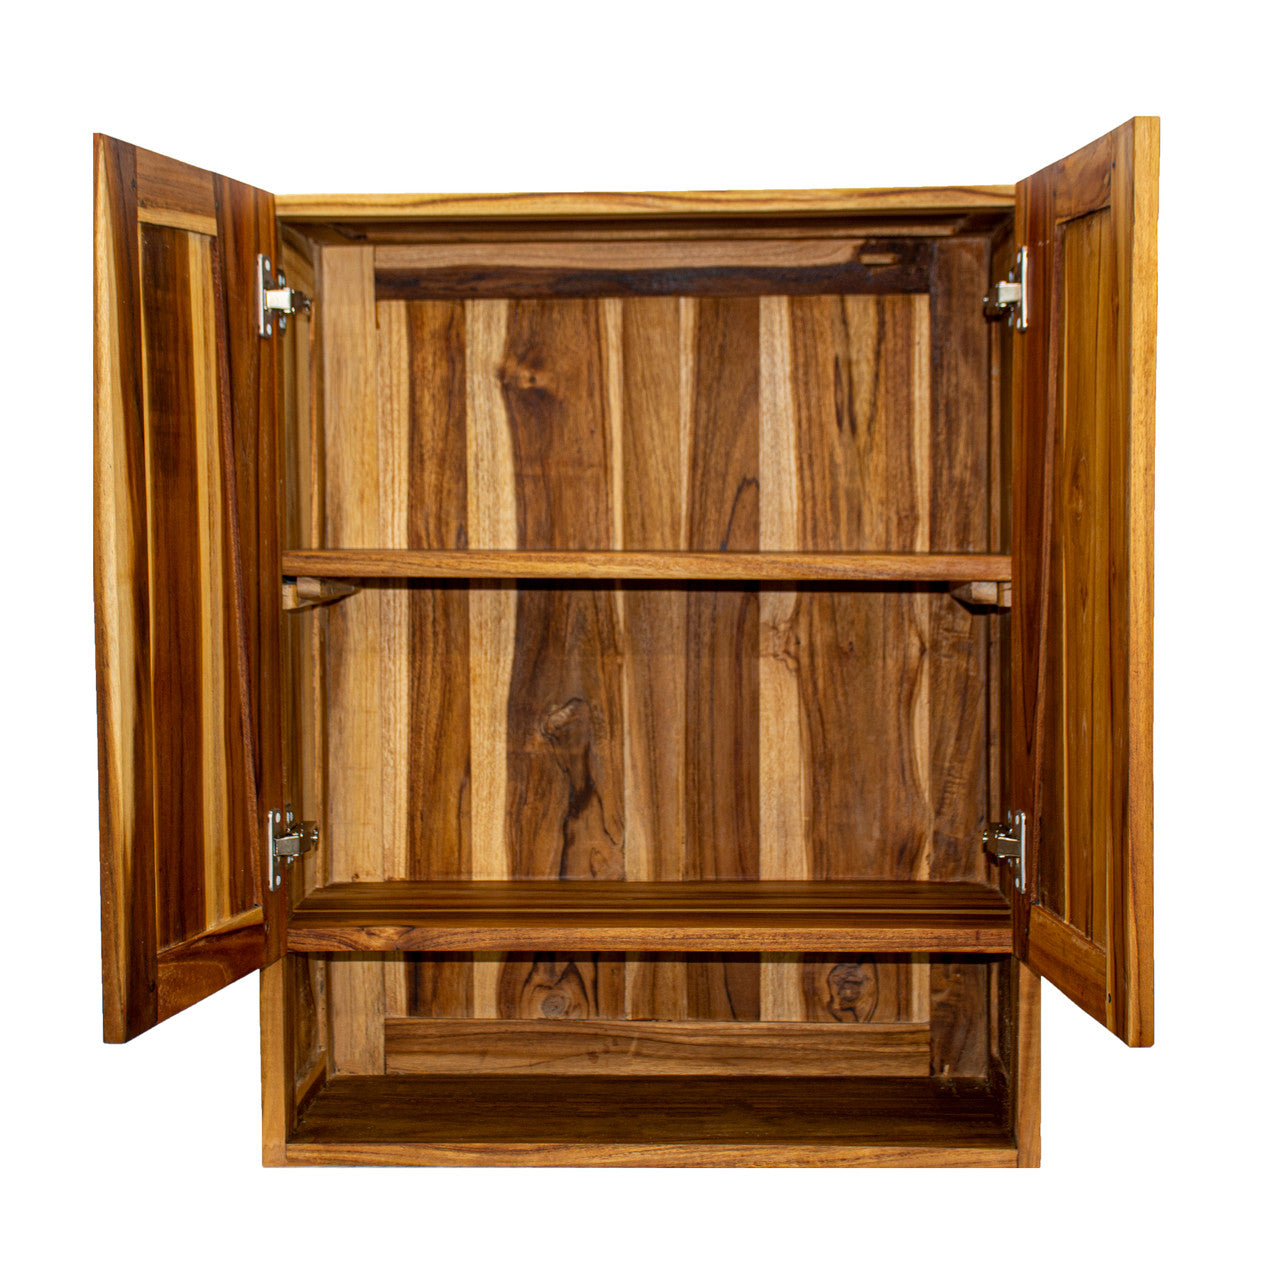 EcoDecors® Significado® 24" Teak Wood Wall Cabinet in EarthyTeak Finish